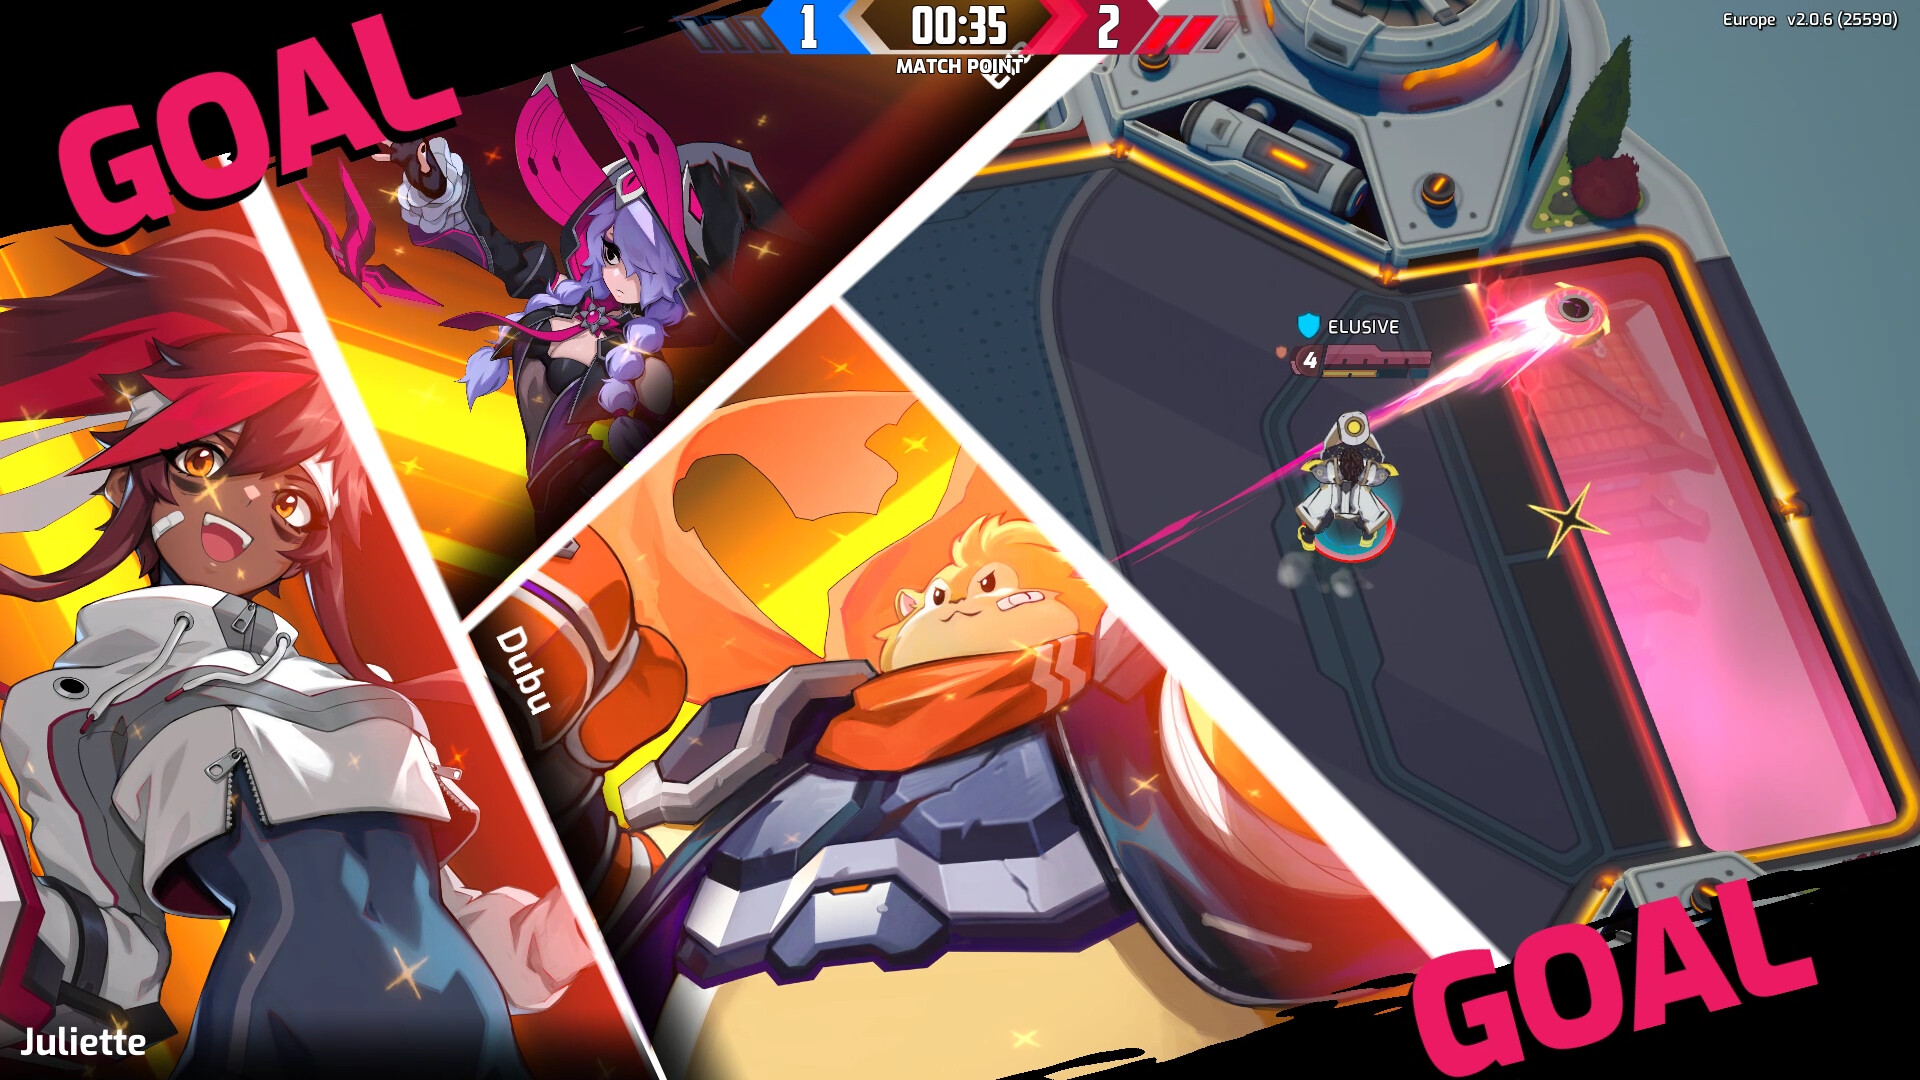 Omega Strikers Download PC, Switch, PS4: como baixar o game